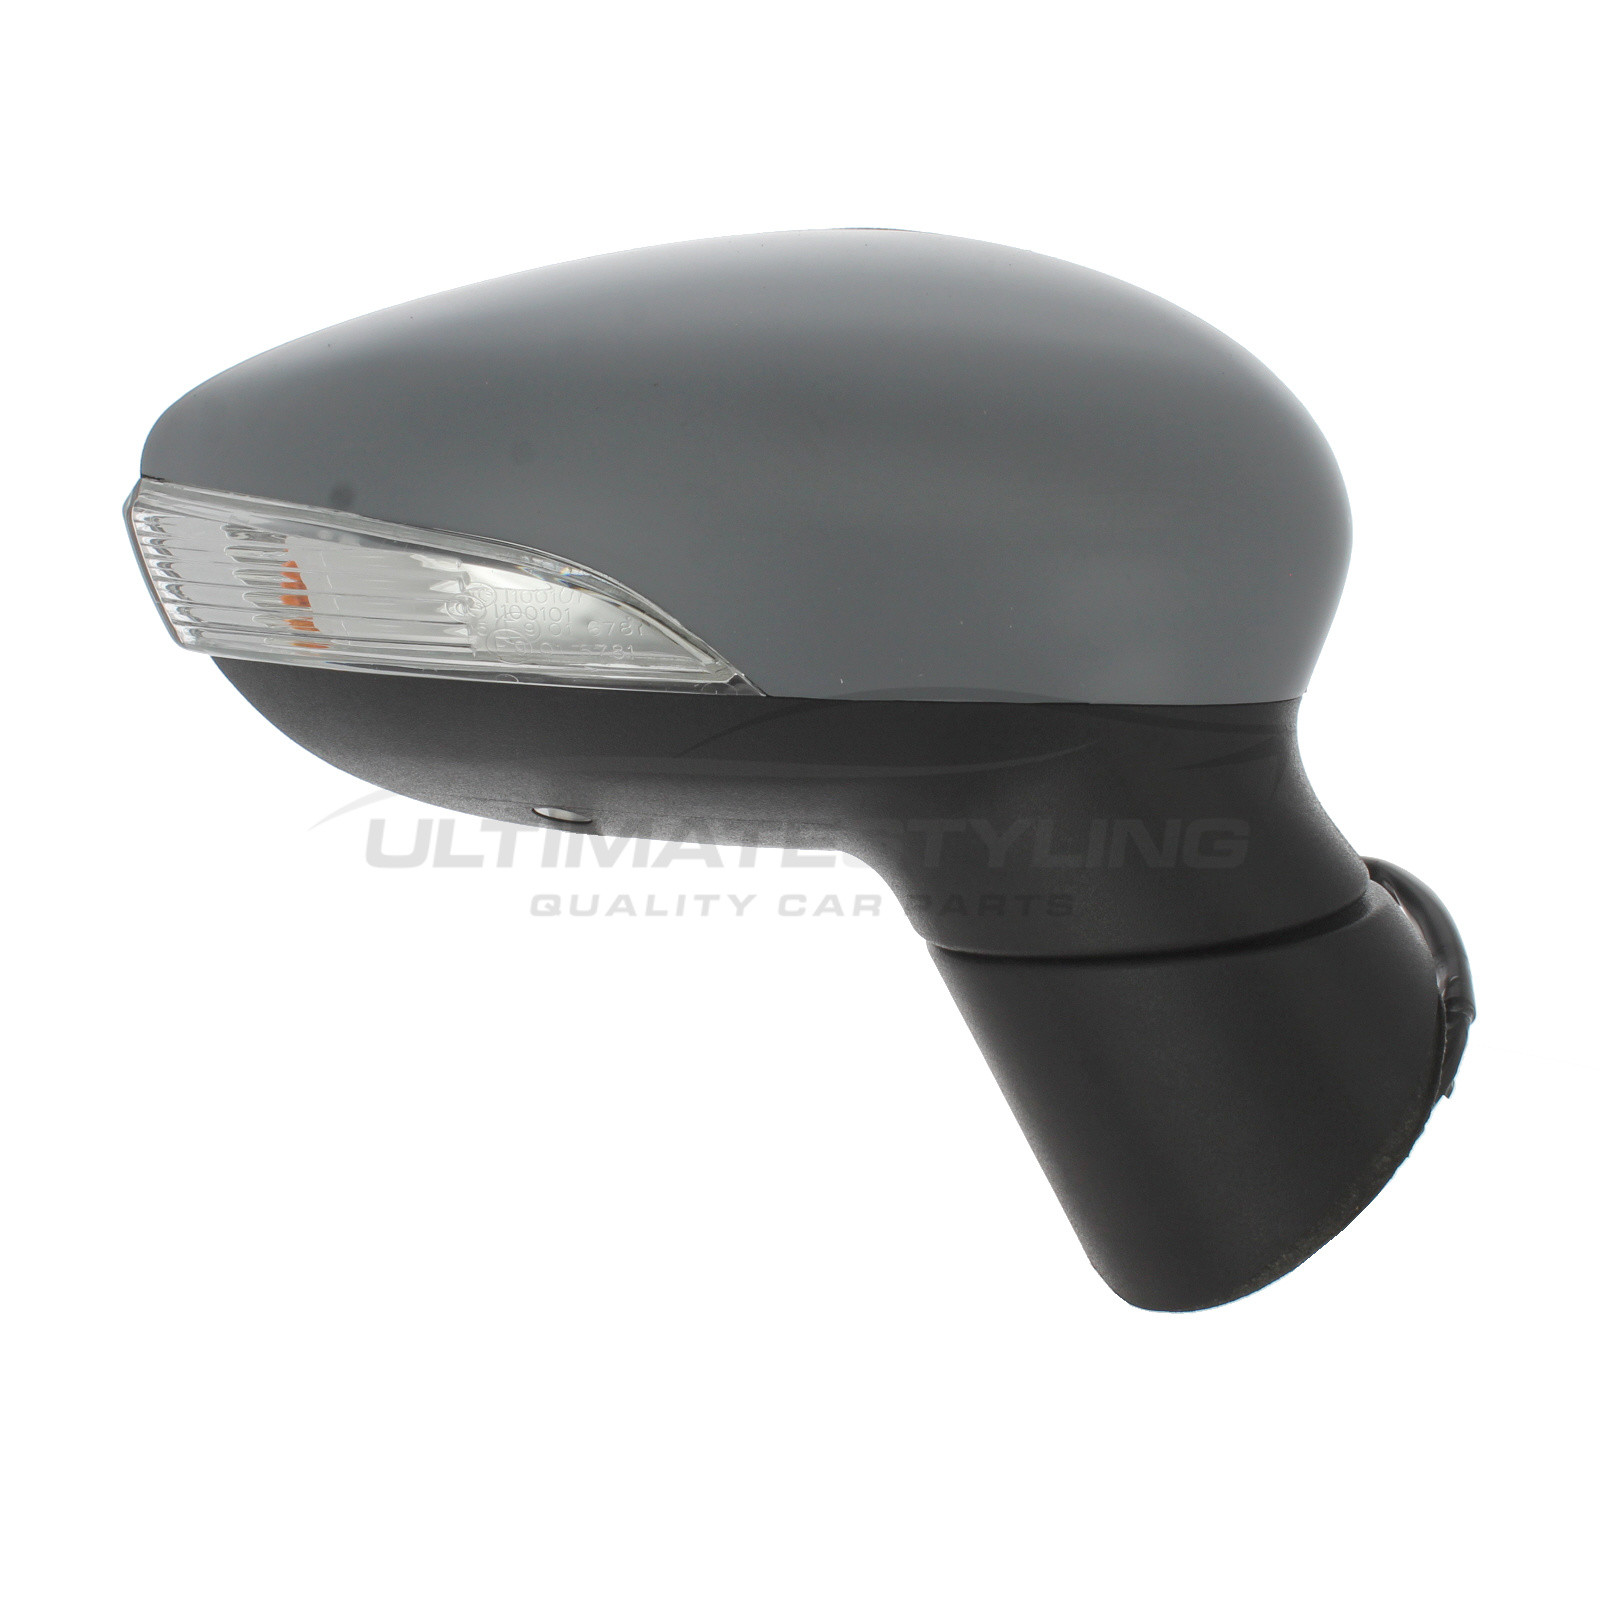 Ford Fiesta Wing Mirror / Door Mirror - Drivers Side (RH) - Electric adjustment - Heated Glass - Power Folding - Indicator - Puddle Light - Primed